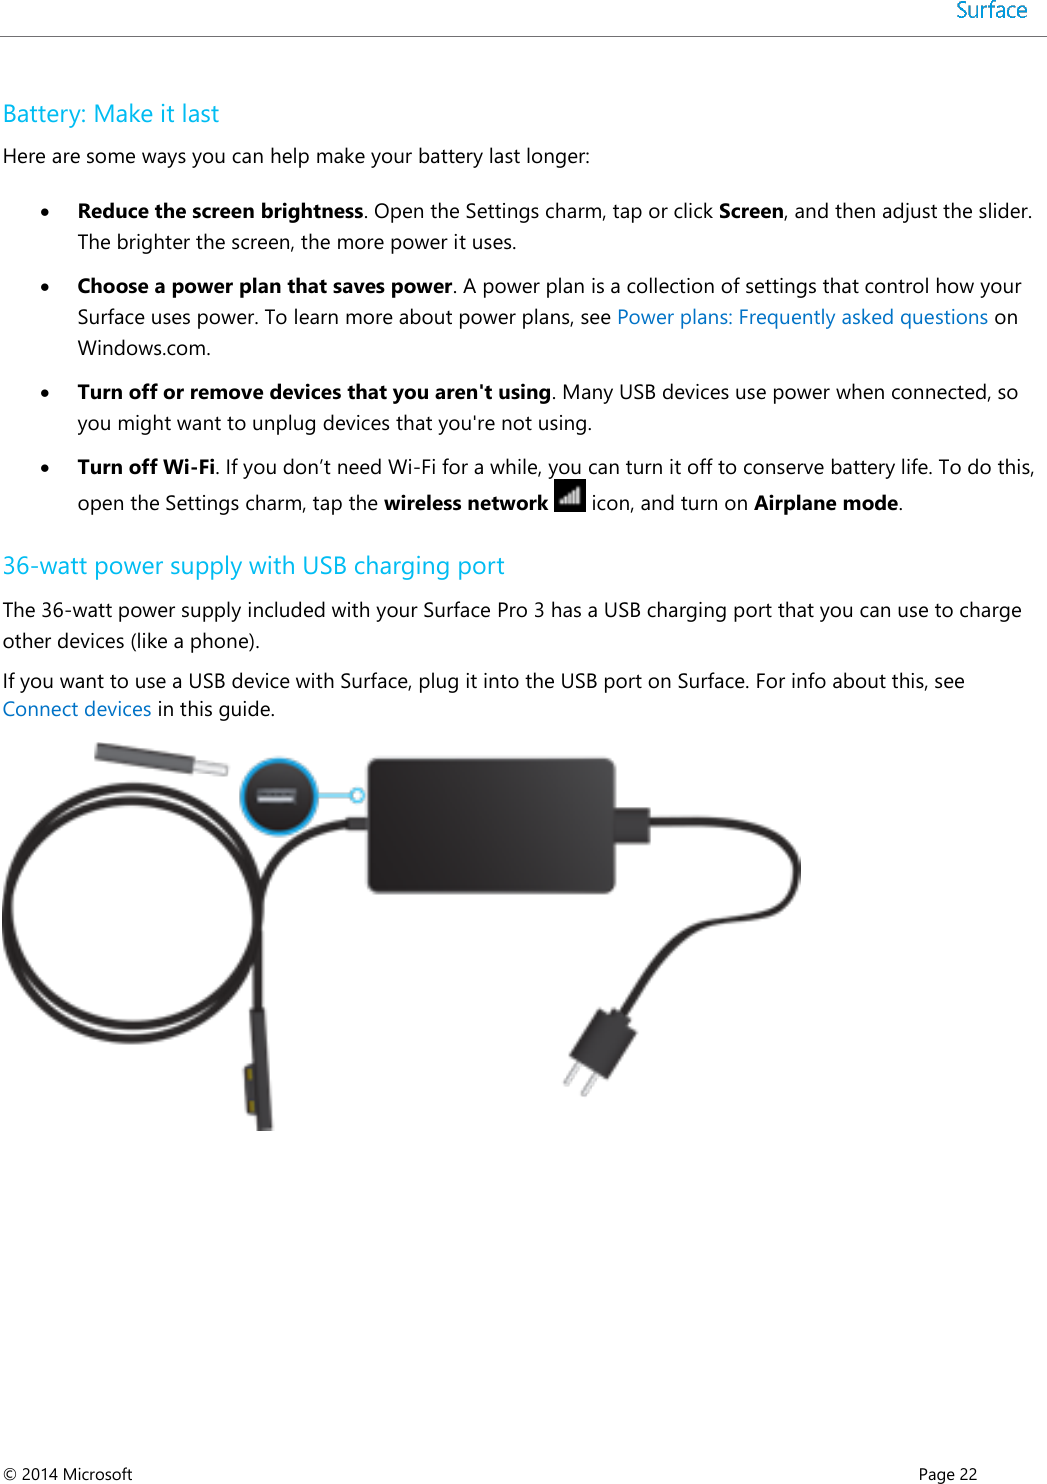  © 2014 Microsoft      Page 22  Battery: Make it last Here are some ways you can help make your battery last longer:   Reduce the screen brightness. Open the Settings charm, tap or click Screen, and then adjust the slider. The brighter the screen, the more power it uses.   Choose a power plan that saves power. A power plan is a collection of settings that control how your Surface uses power. To learn more about power plans, see Power plans: Frequently asked questions on Windows.com.    Turn off or remove devices that you aren&apos;t using. Many USB devices use power when connected, so you might want to unplug devices that you&apos;re not using.   Turn off Wi-Fi. If you don’t need Wi-Fi for a while, you can turn it off to conserve battery life. To do this, open the Settings charm, tap the wireless network   icon, and turn on Airplane mode.  36-watt power supply with USB charging port The 36-watt power supply included with your Surface Pro 3 has a USB charging port that you can use to charge other devices (like a phone). If you want to use a USB device with Surface, plug it into the USB port on Surface. For info about this, see Connect devices in this guide.    